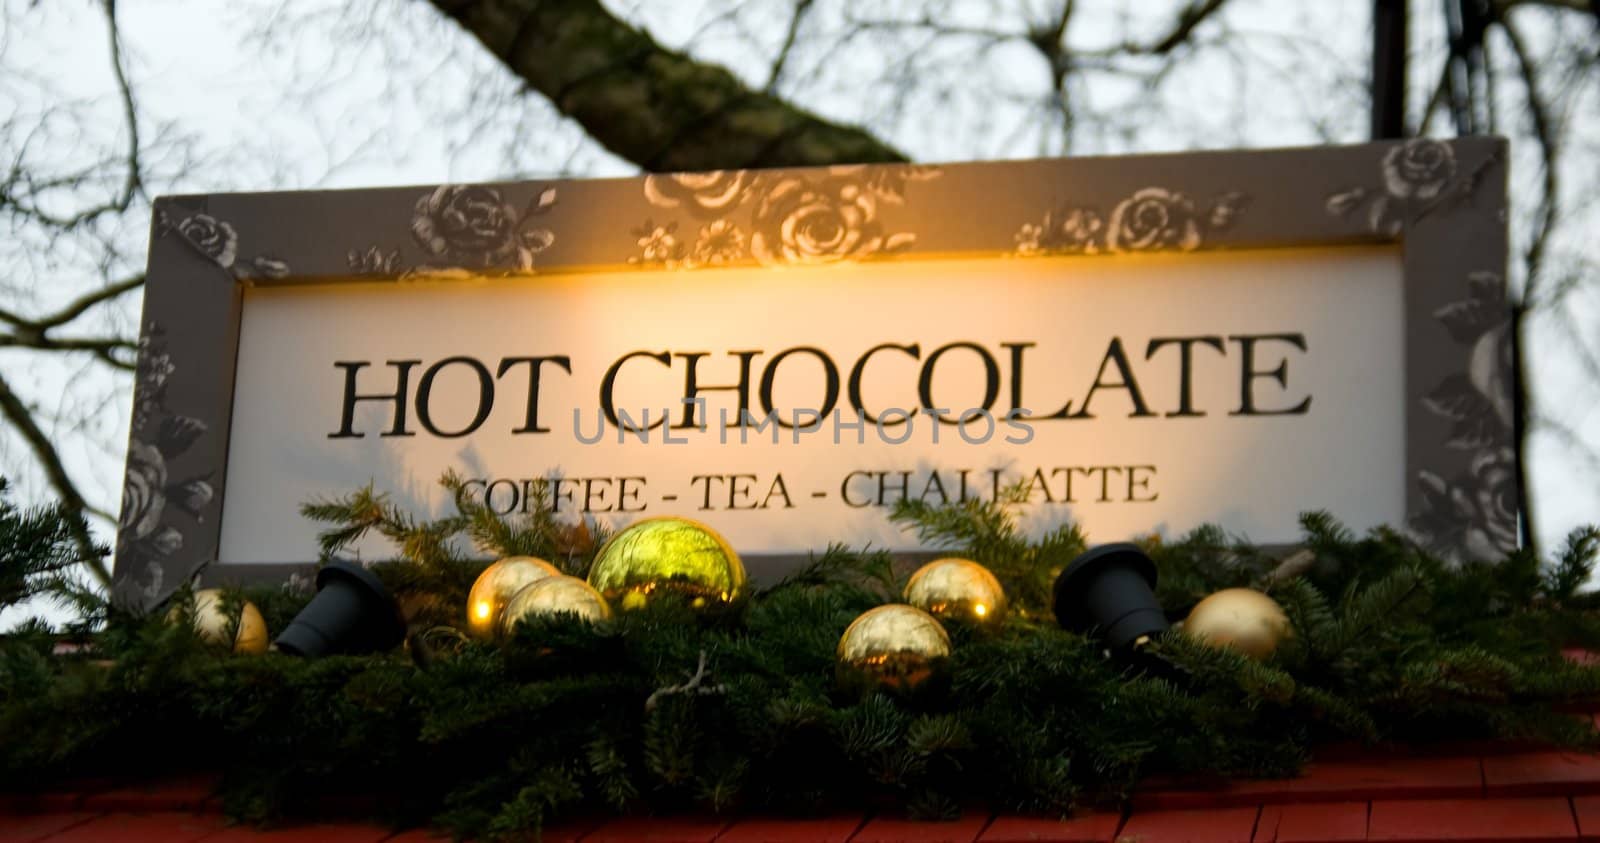 Sign with the text "HOT CHOCOLATE" during Christmas time